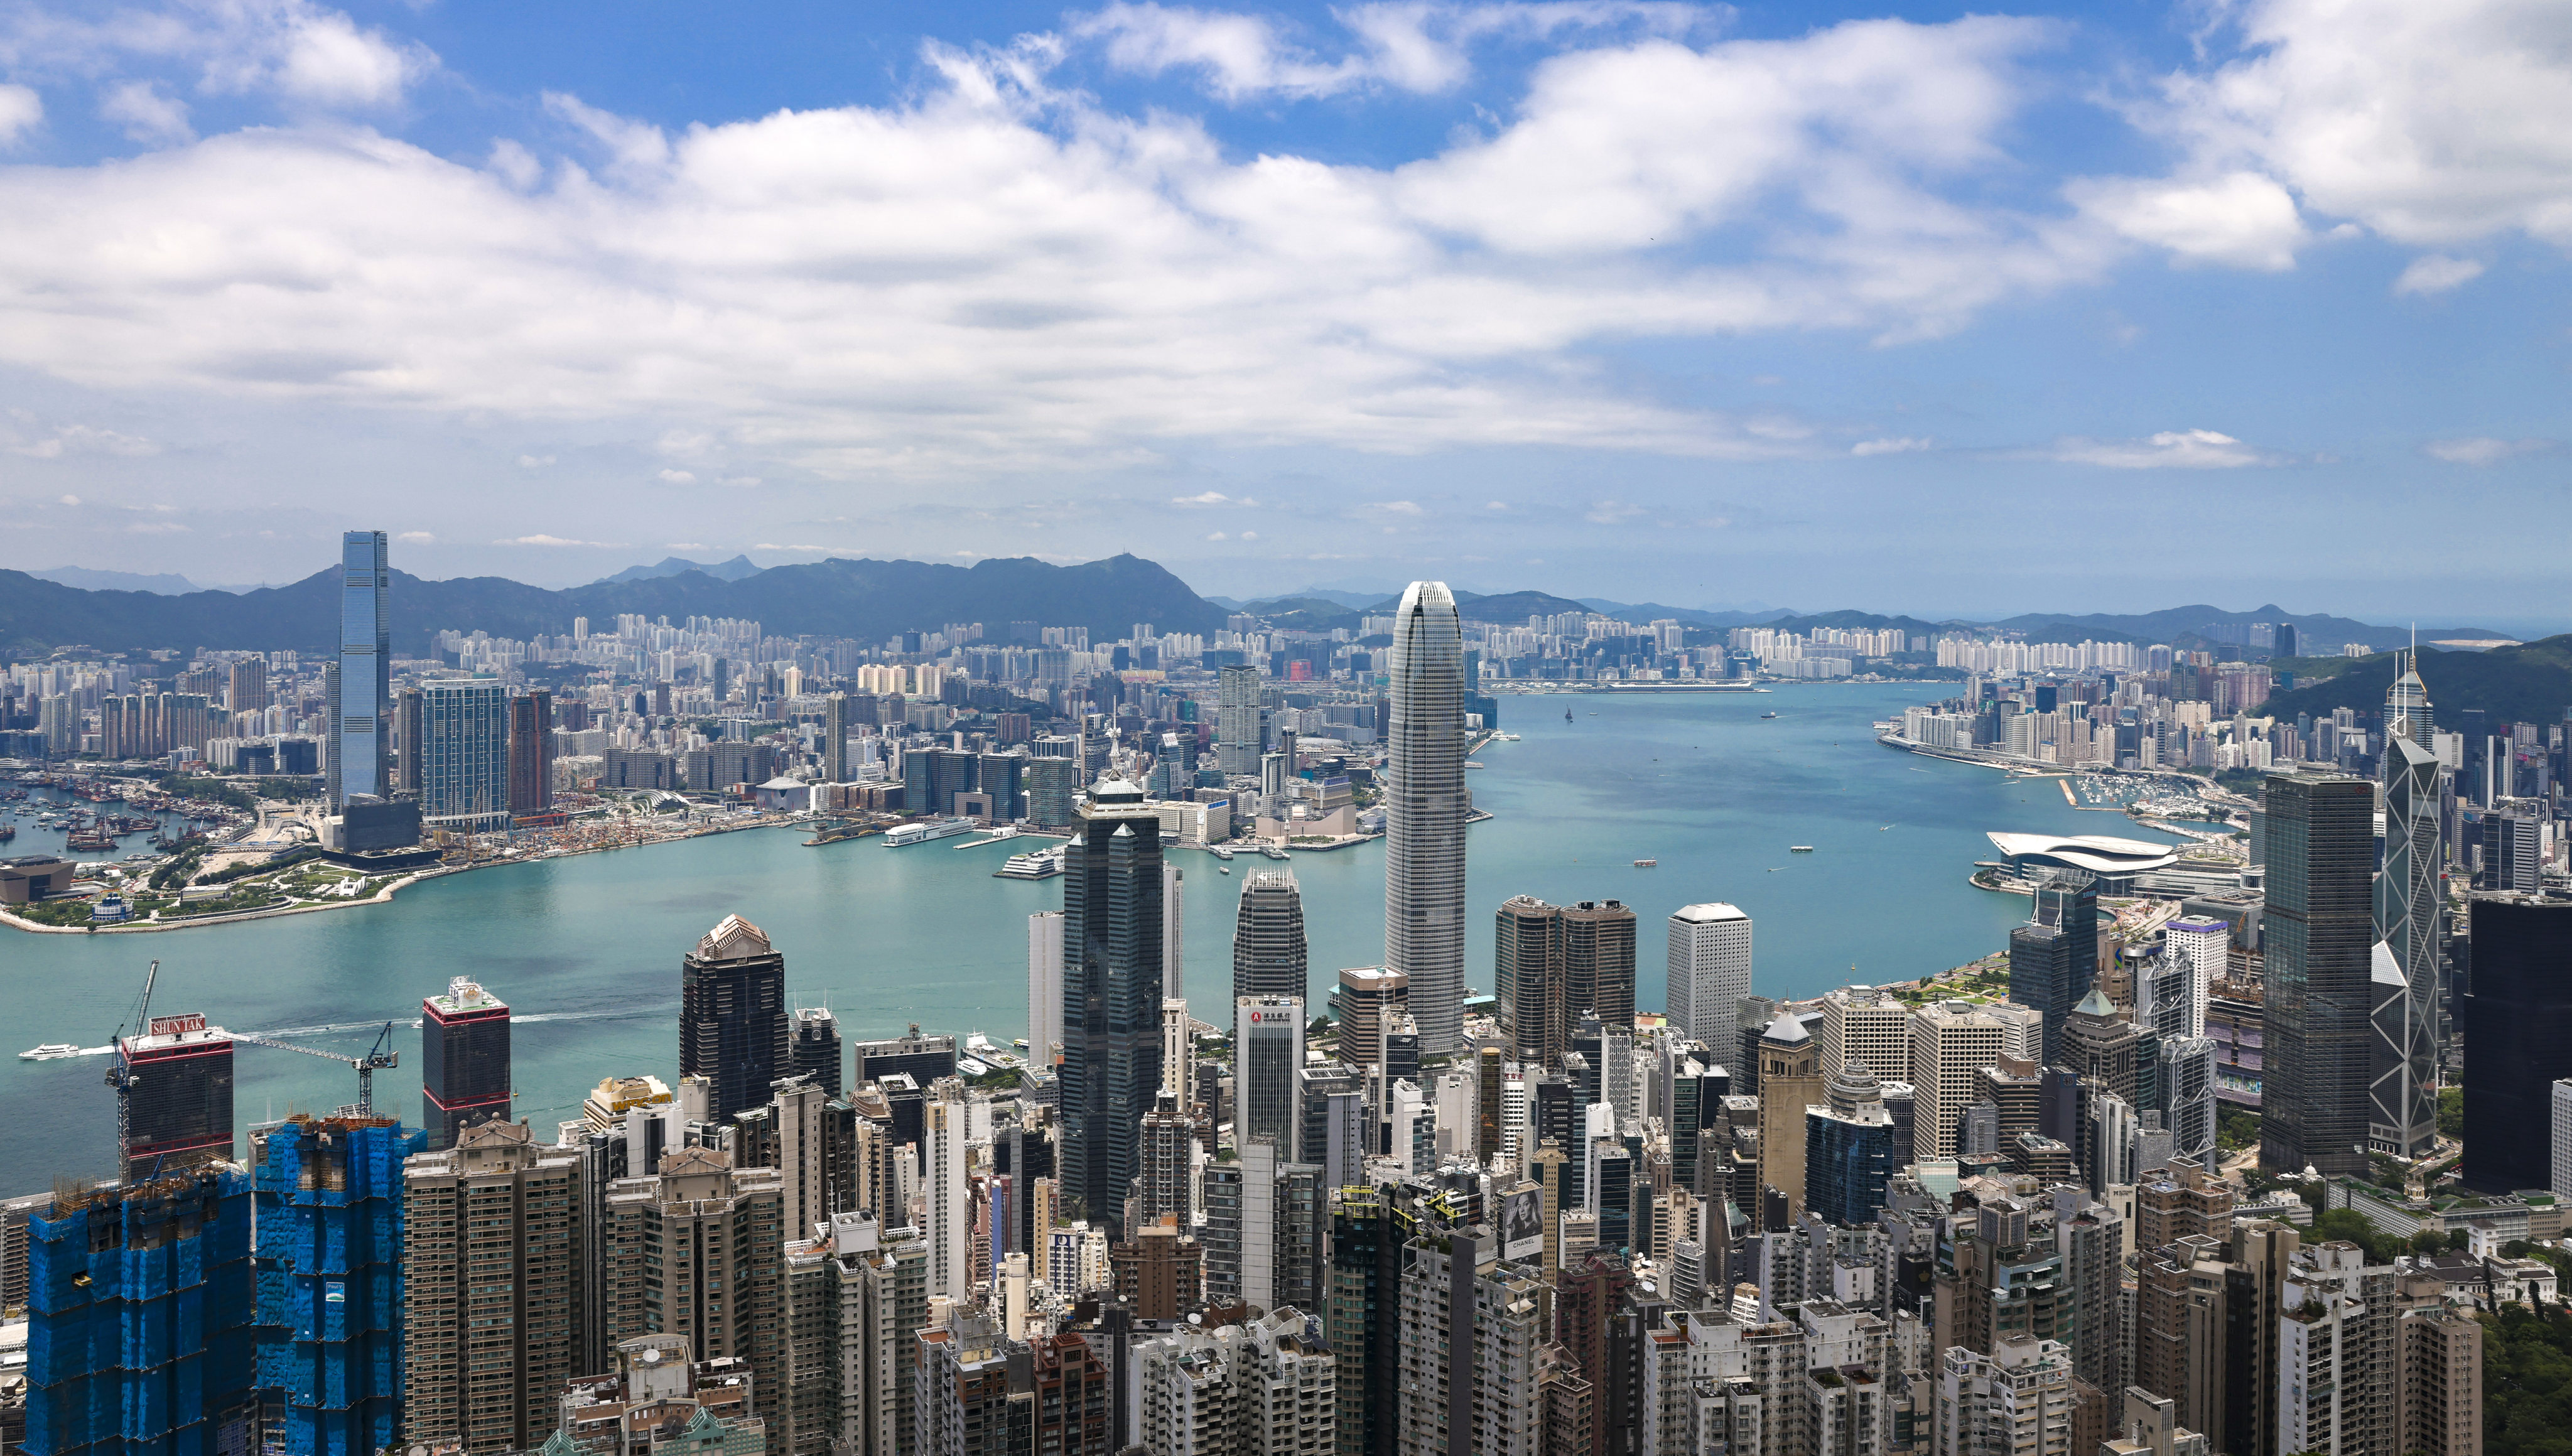 A view of Hong Kong skyline, from The Peak on May 17, 2022. Photo: K. Y. Cheng